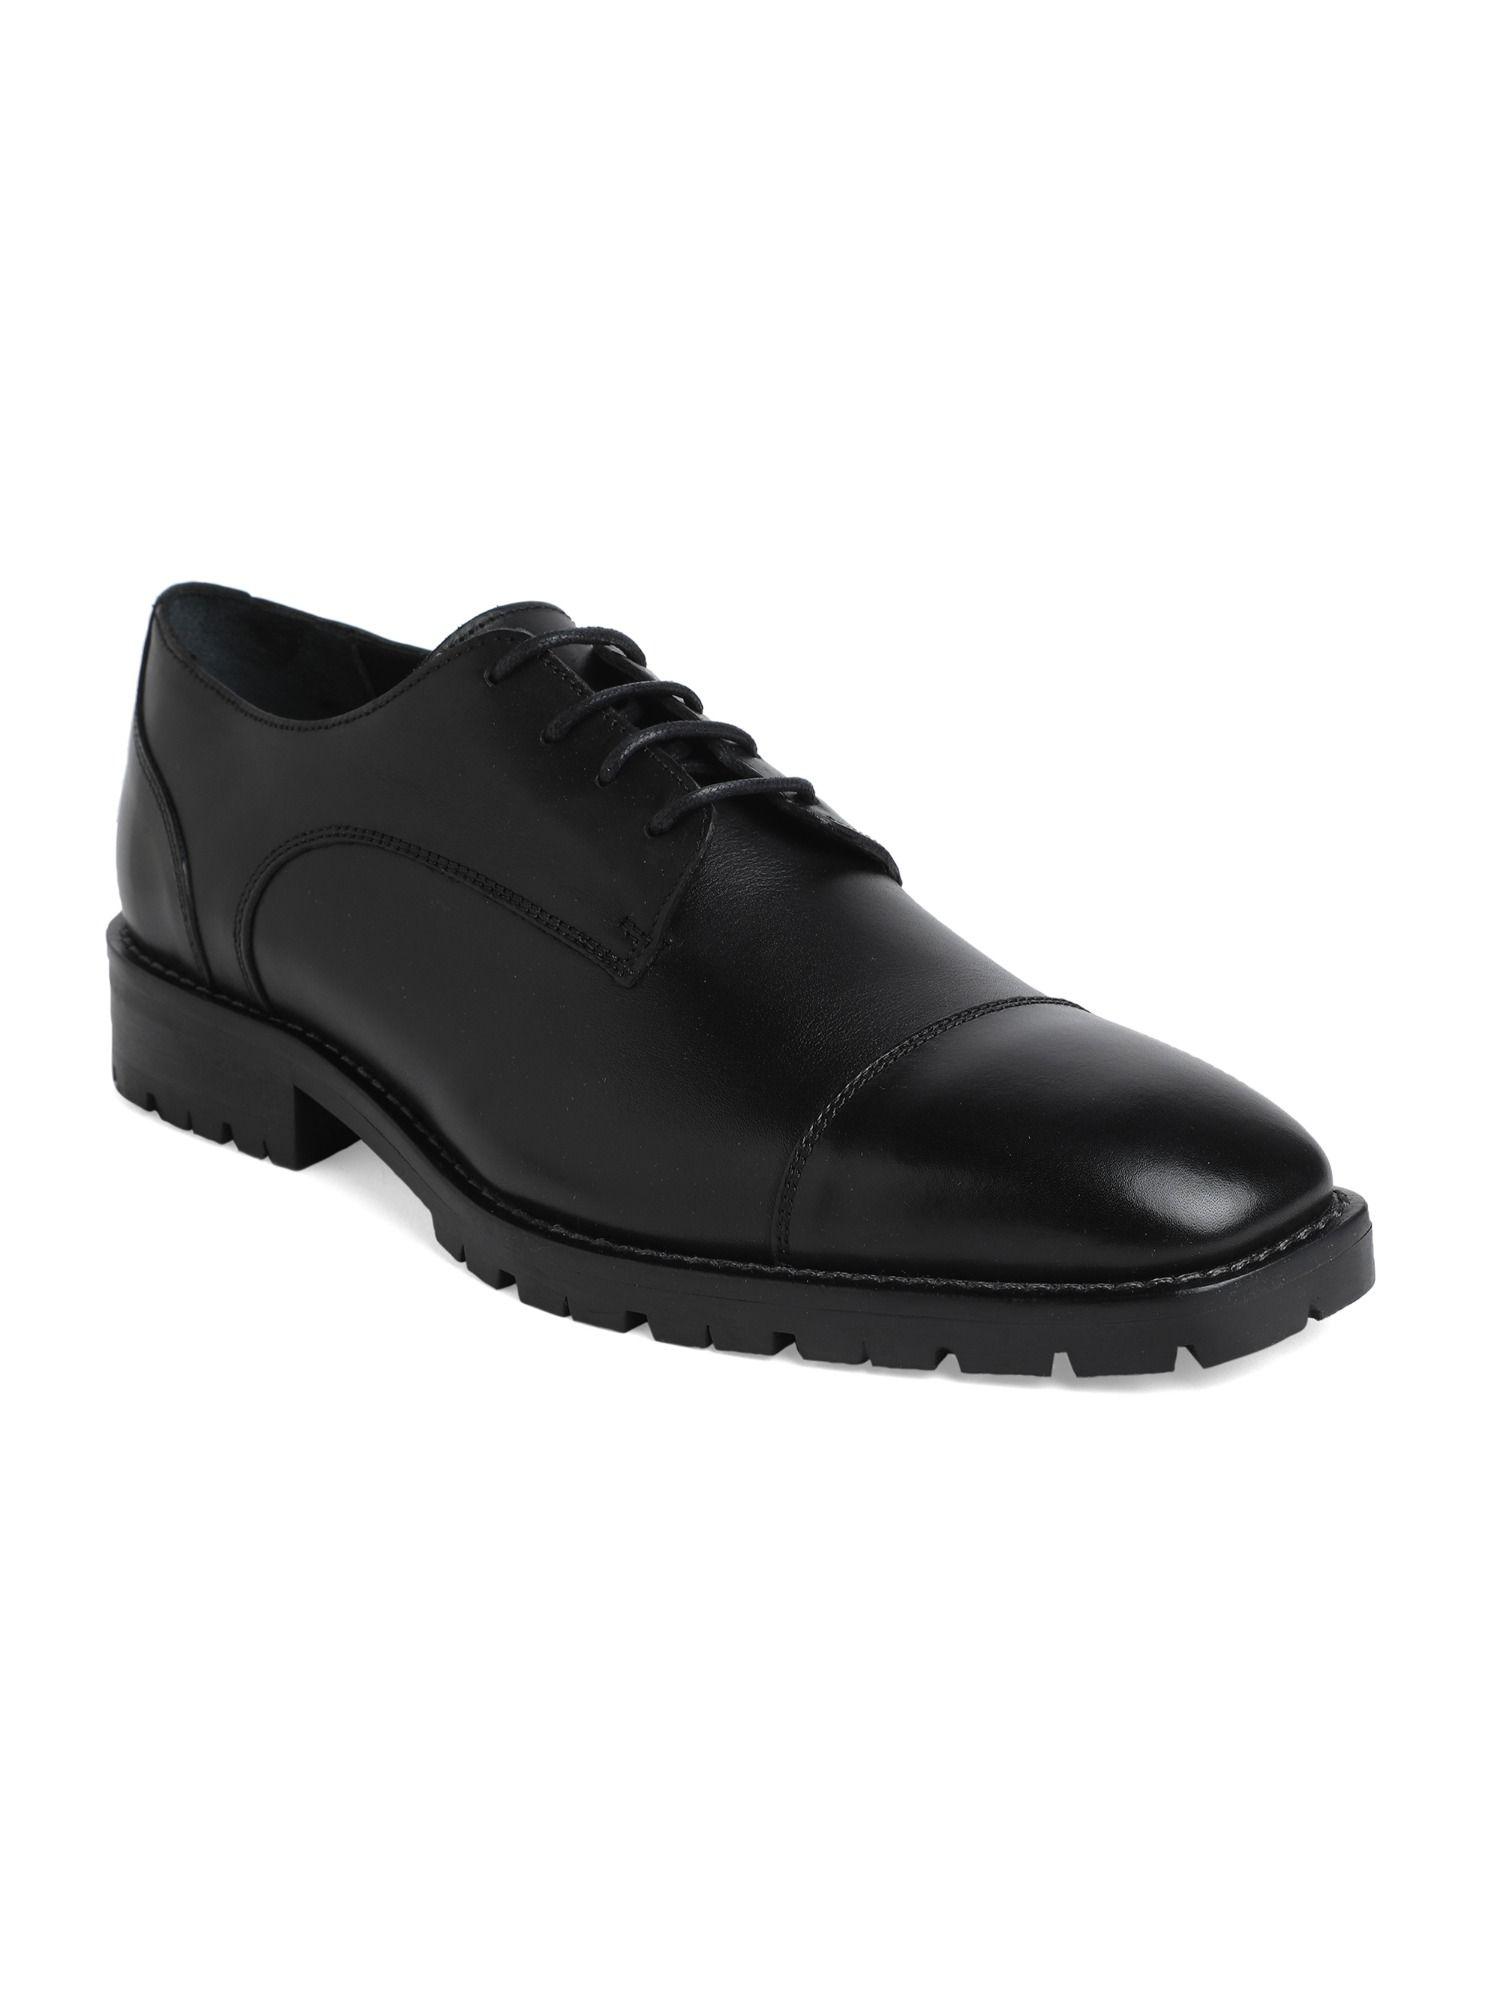 monte carlo leather black solid formal shoes